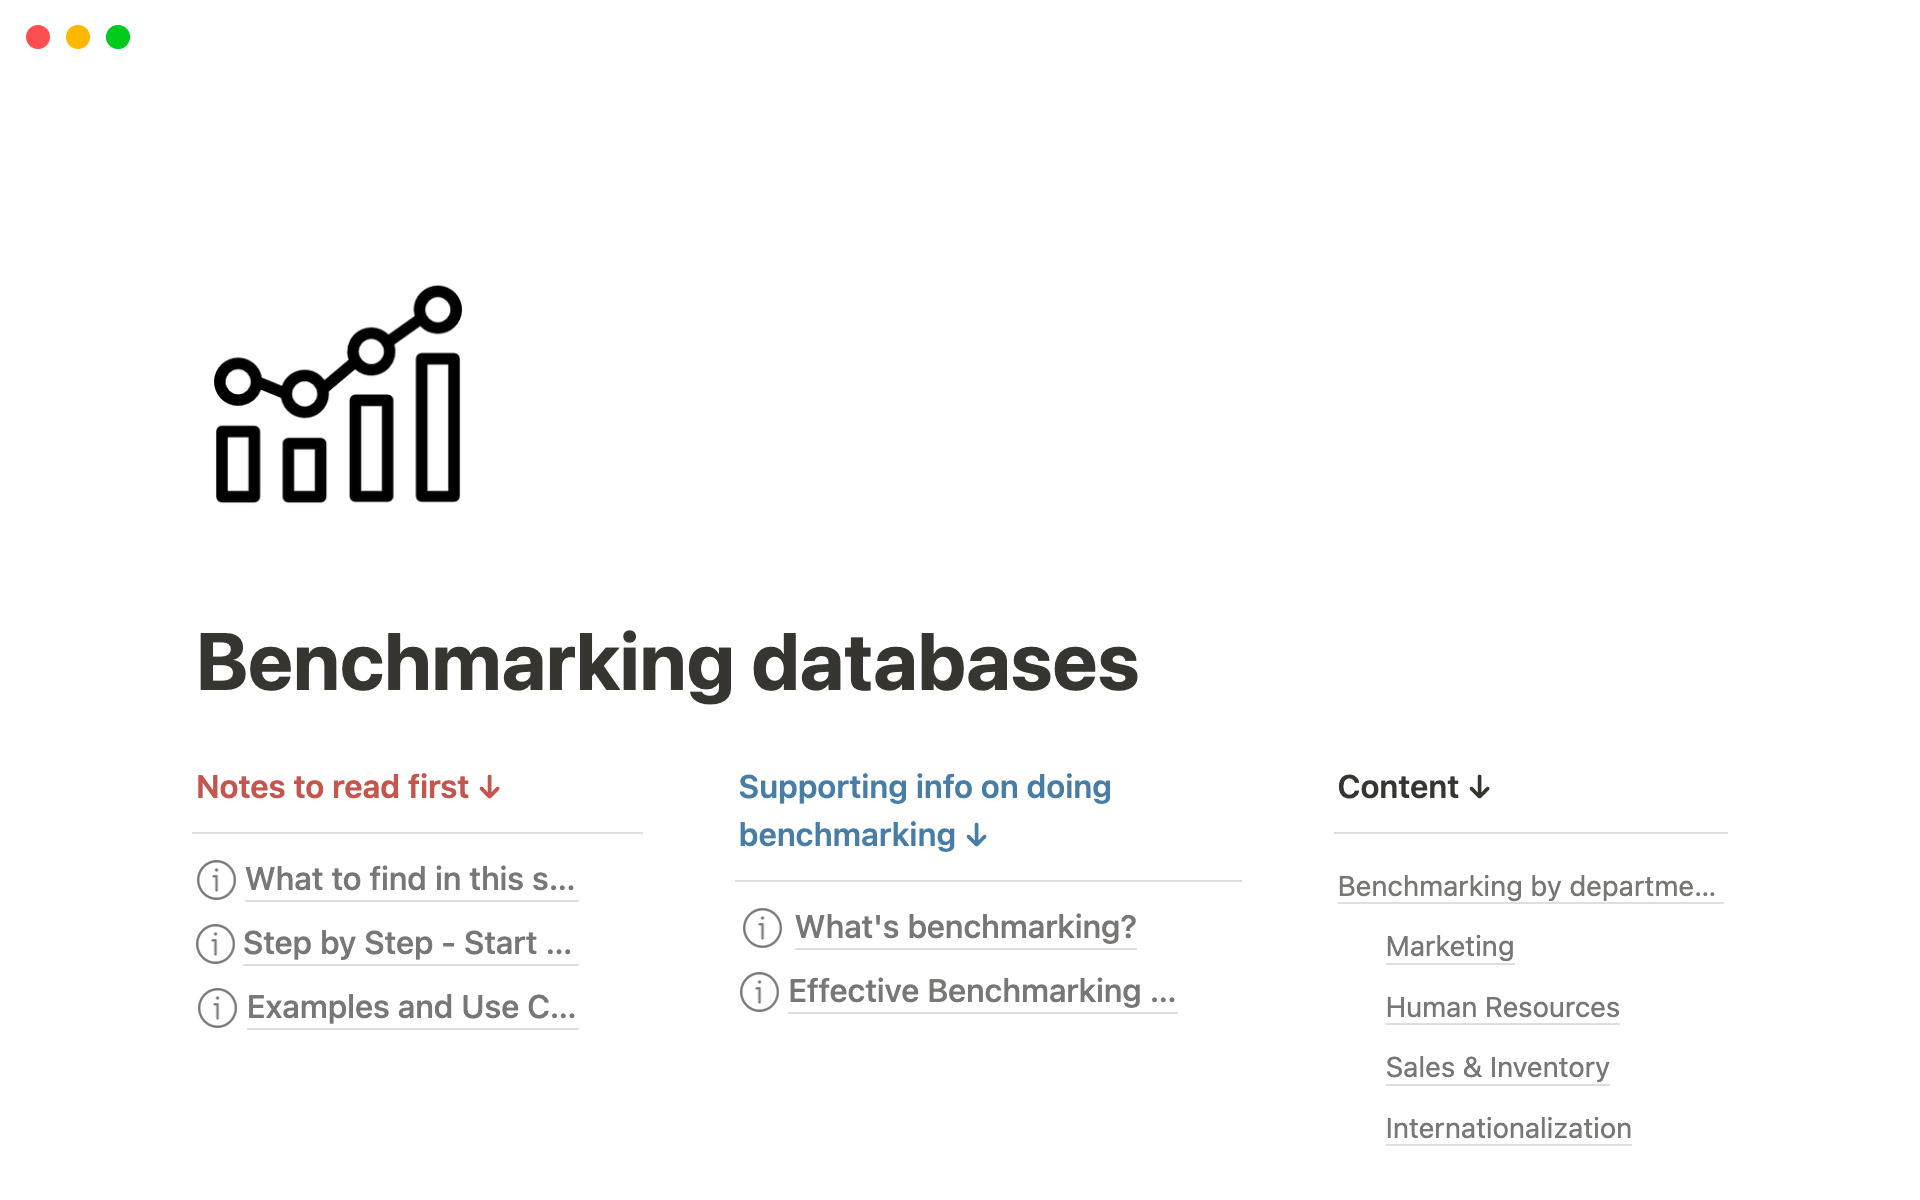 A Notion tool to compare processes, metrics and indicators (benchmarking)